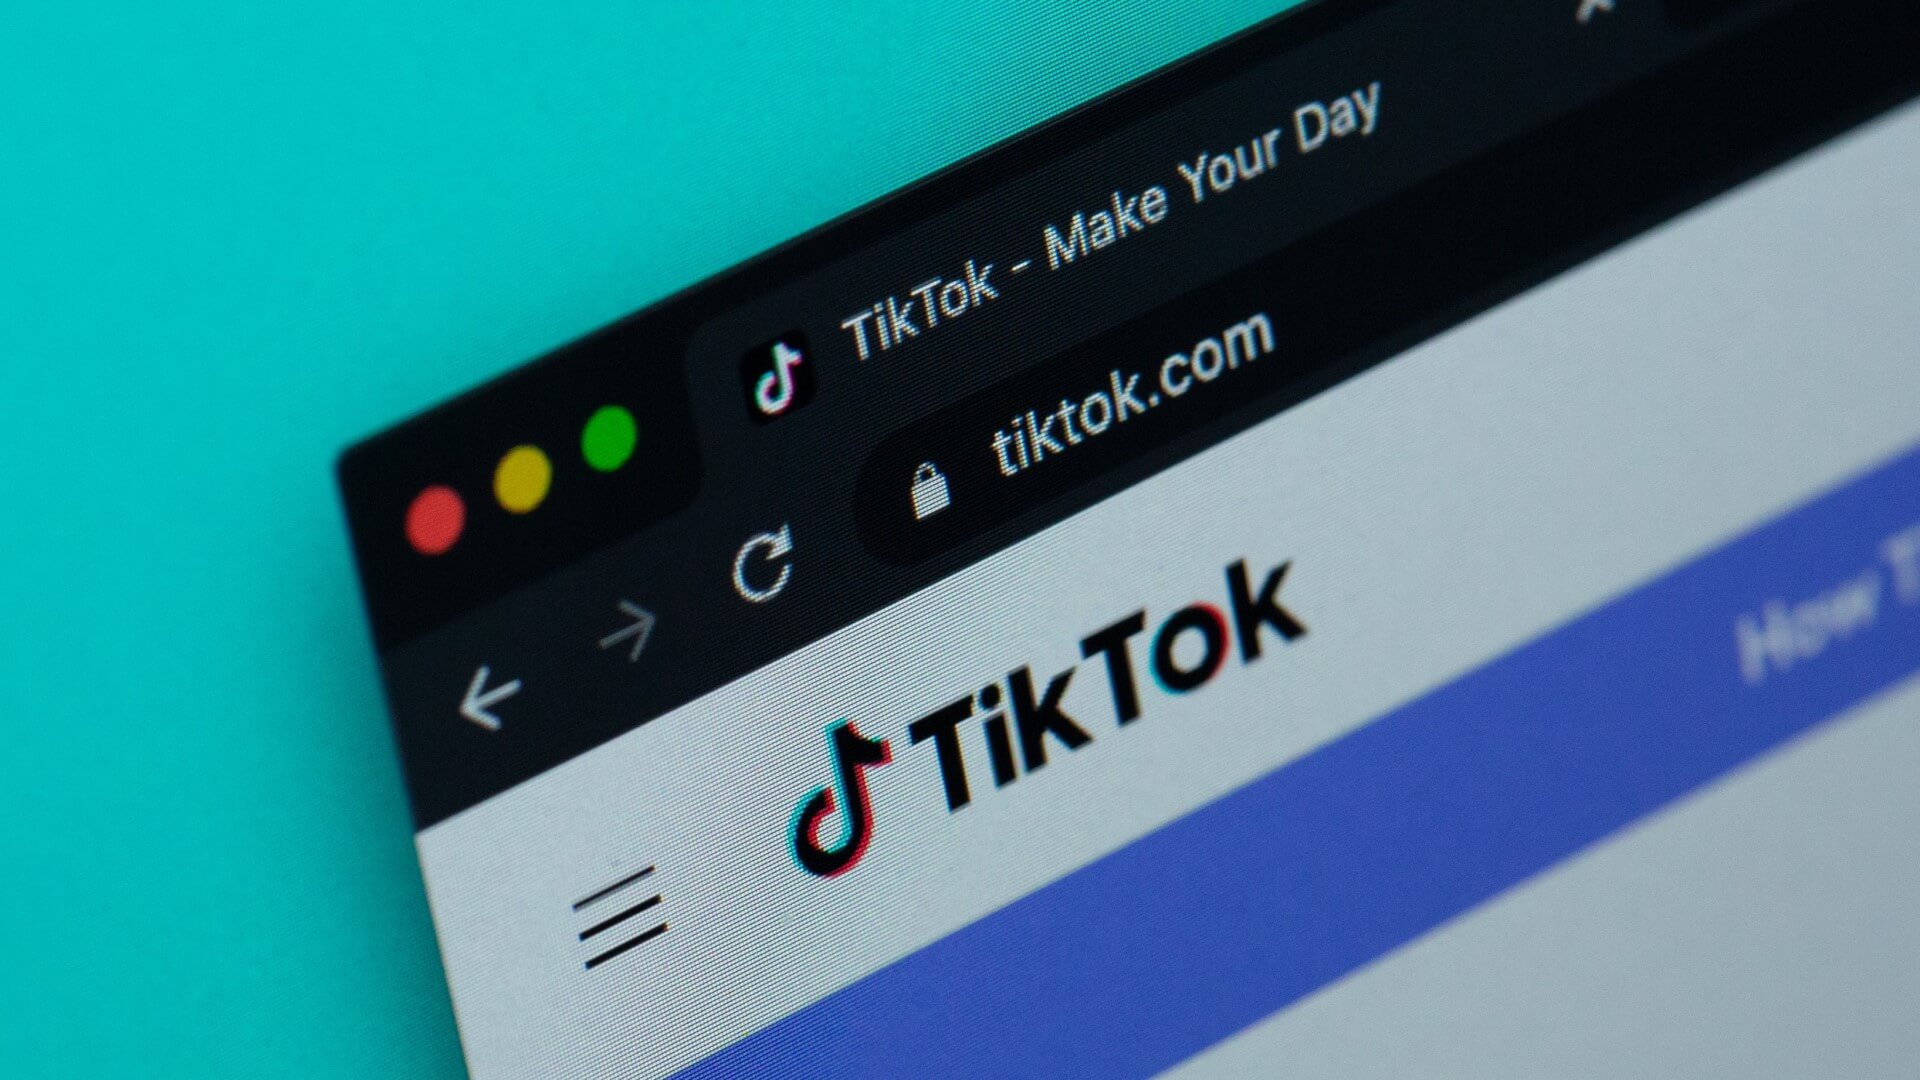 Don't Get Hacked! TikTok Password & 2FA Guide